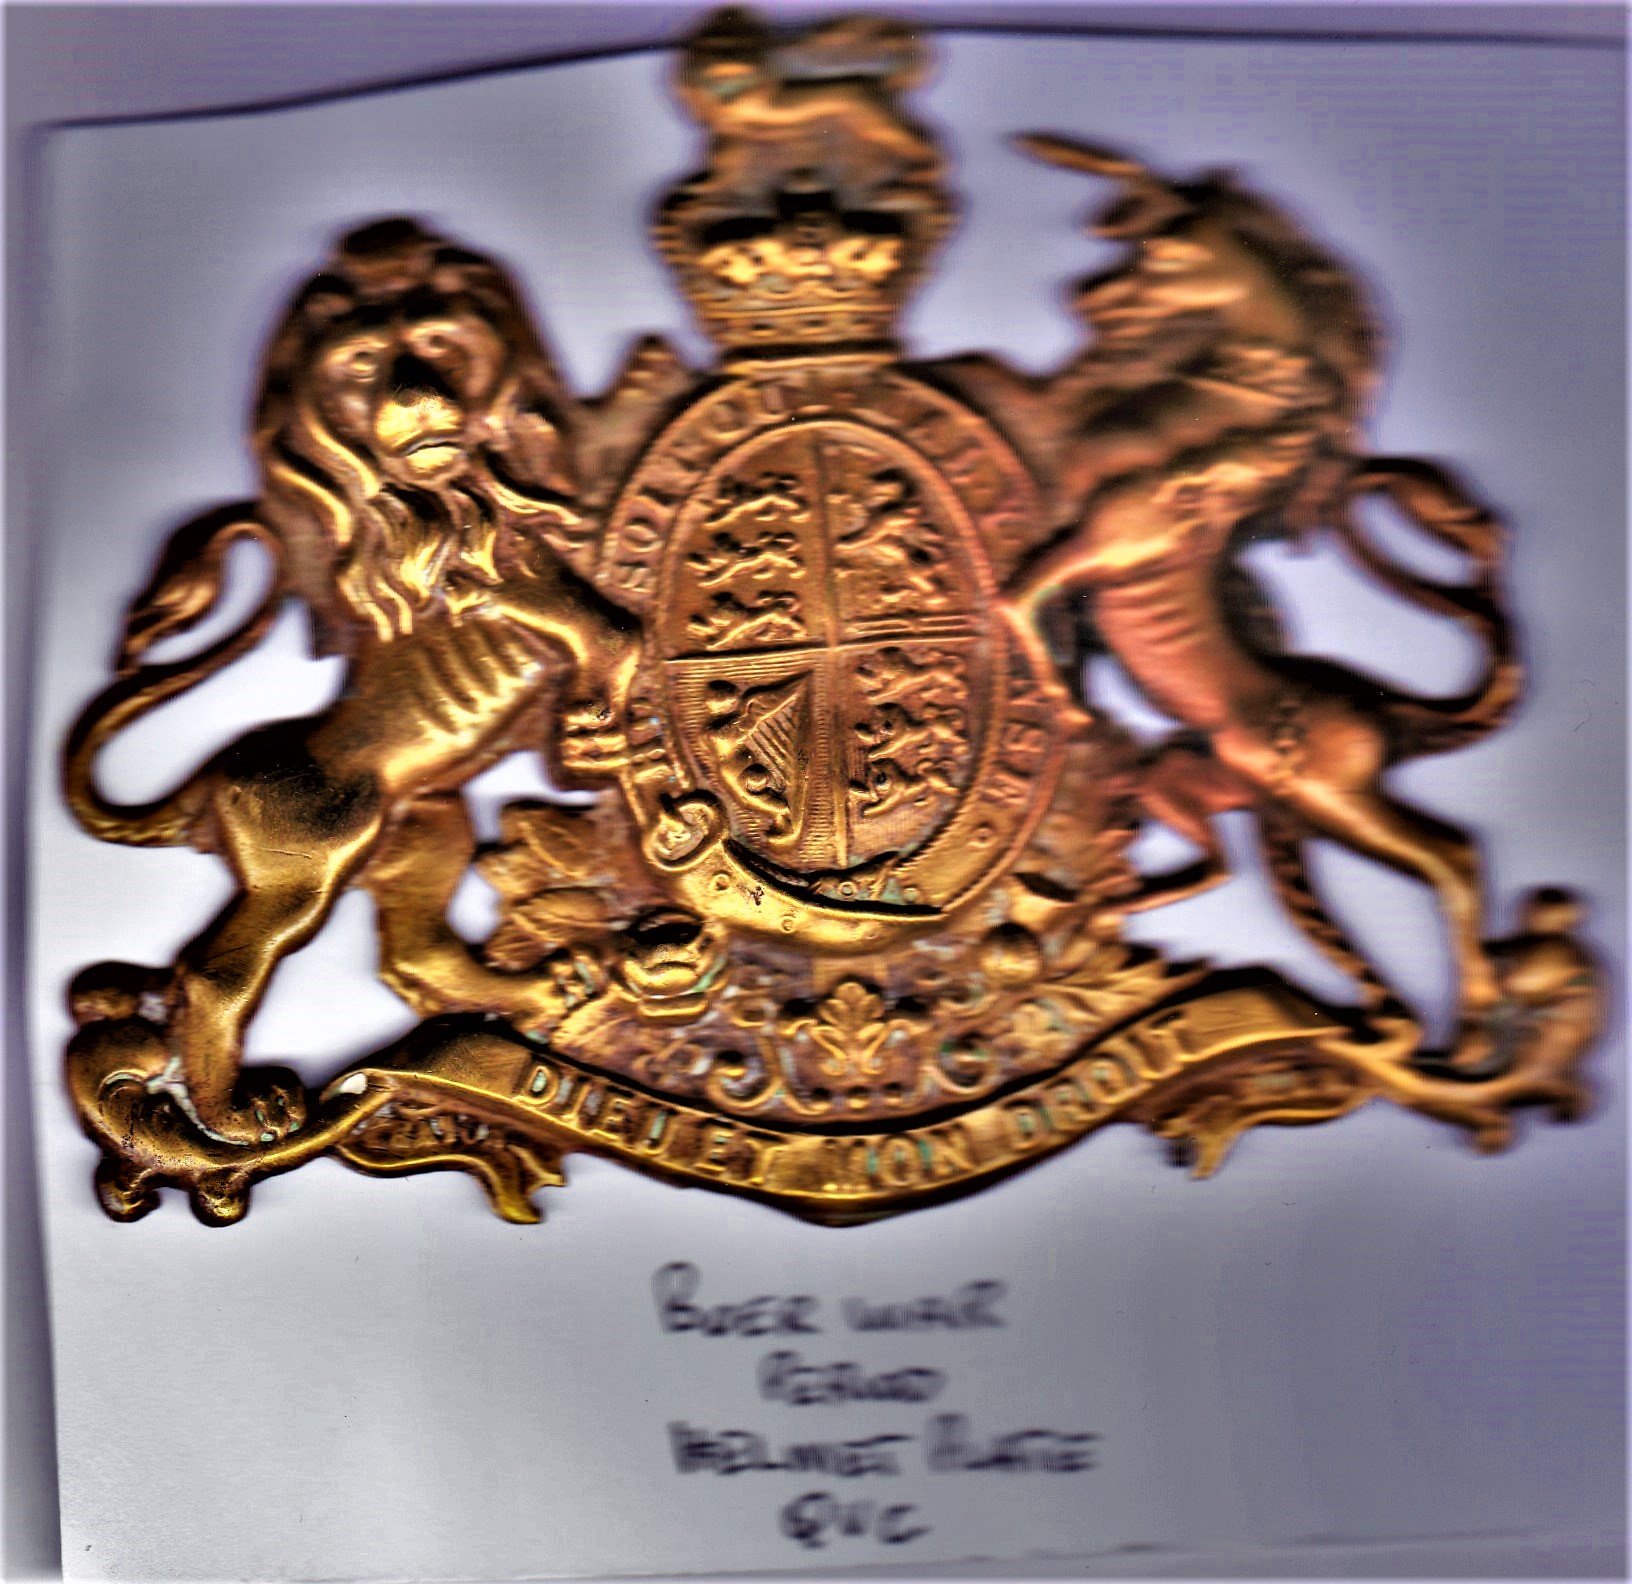 British Boer War Period Helmet Plate, in the design of the Royal Coat of Arms, a large plate made by